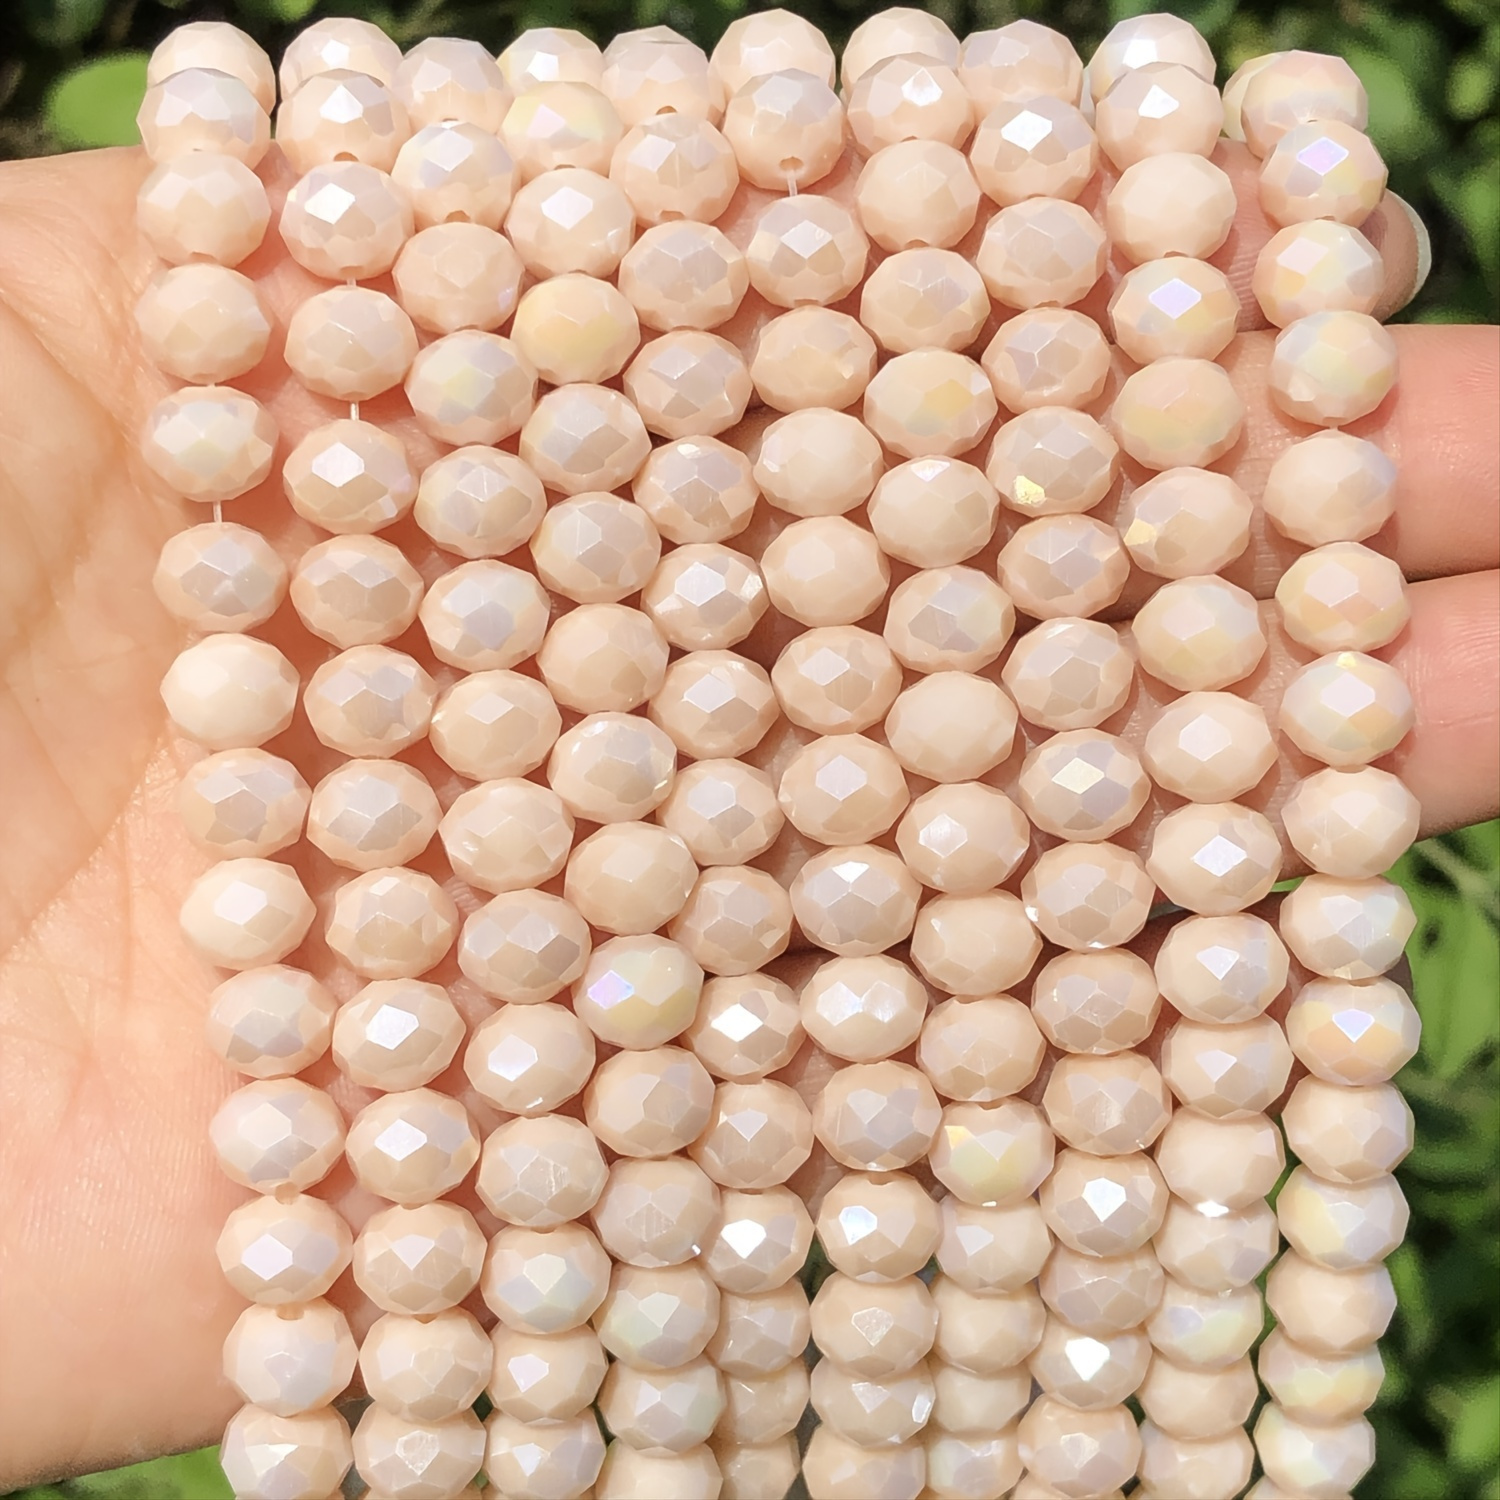 Cream Color Seed Beads - 2mm Round Hole Spacer Beads Jewelry Making 2000pcs  Set